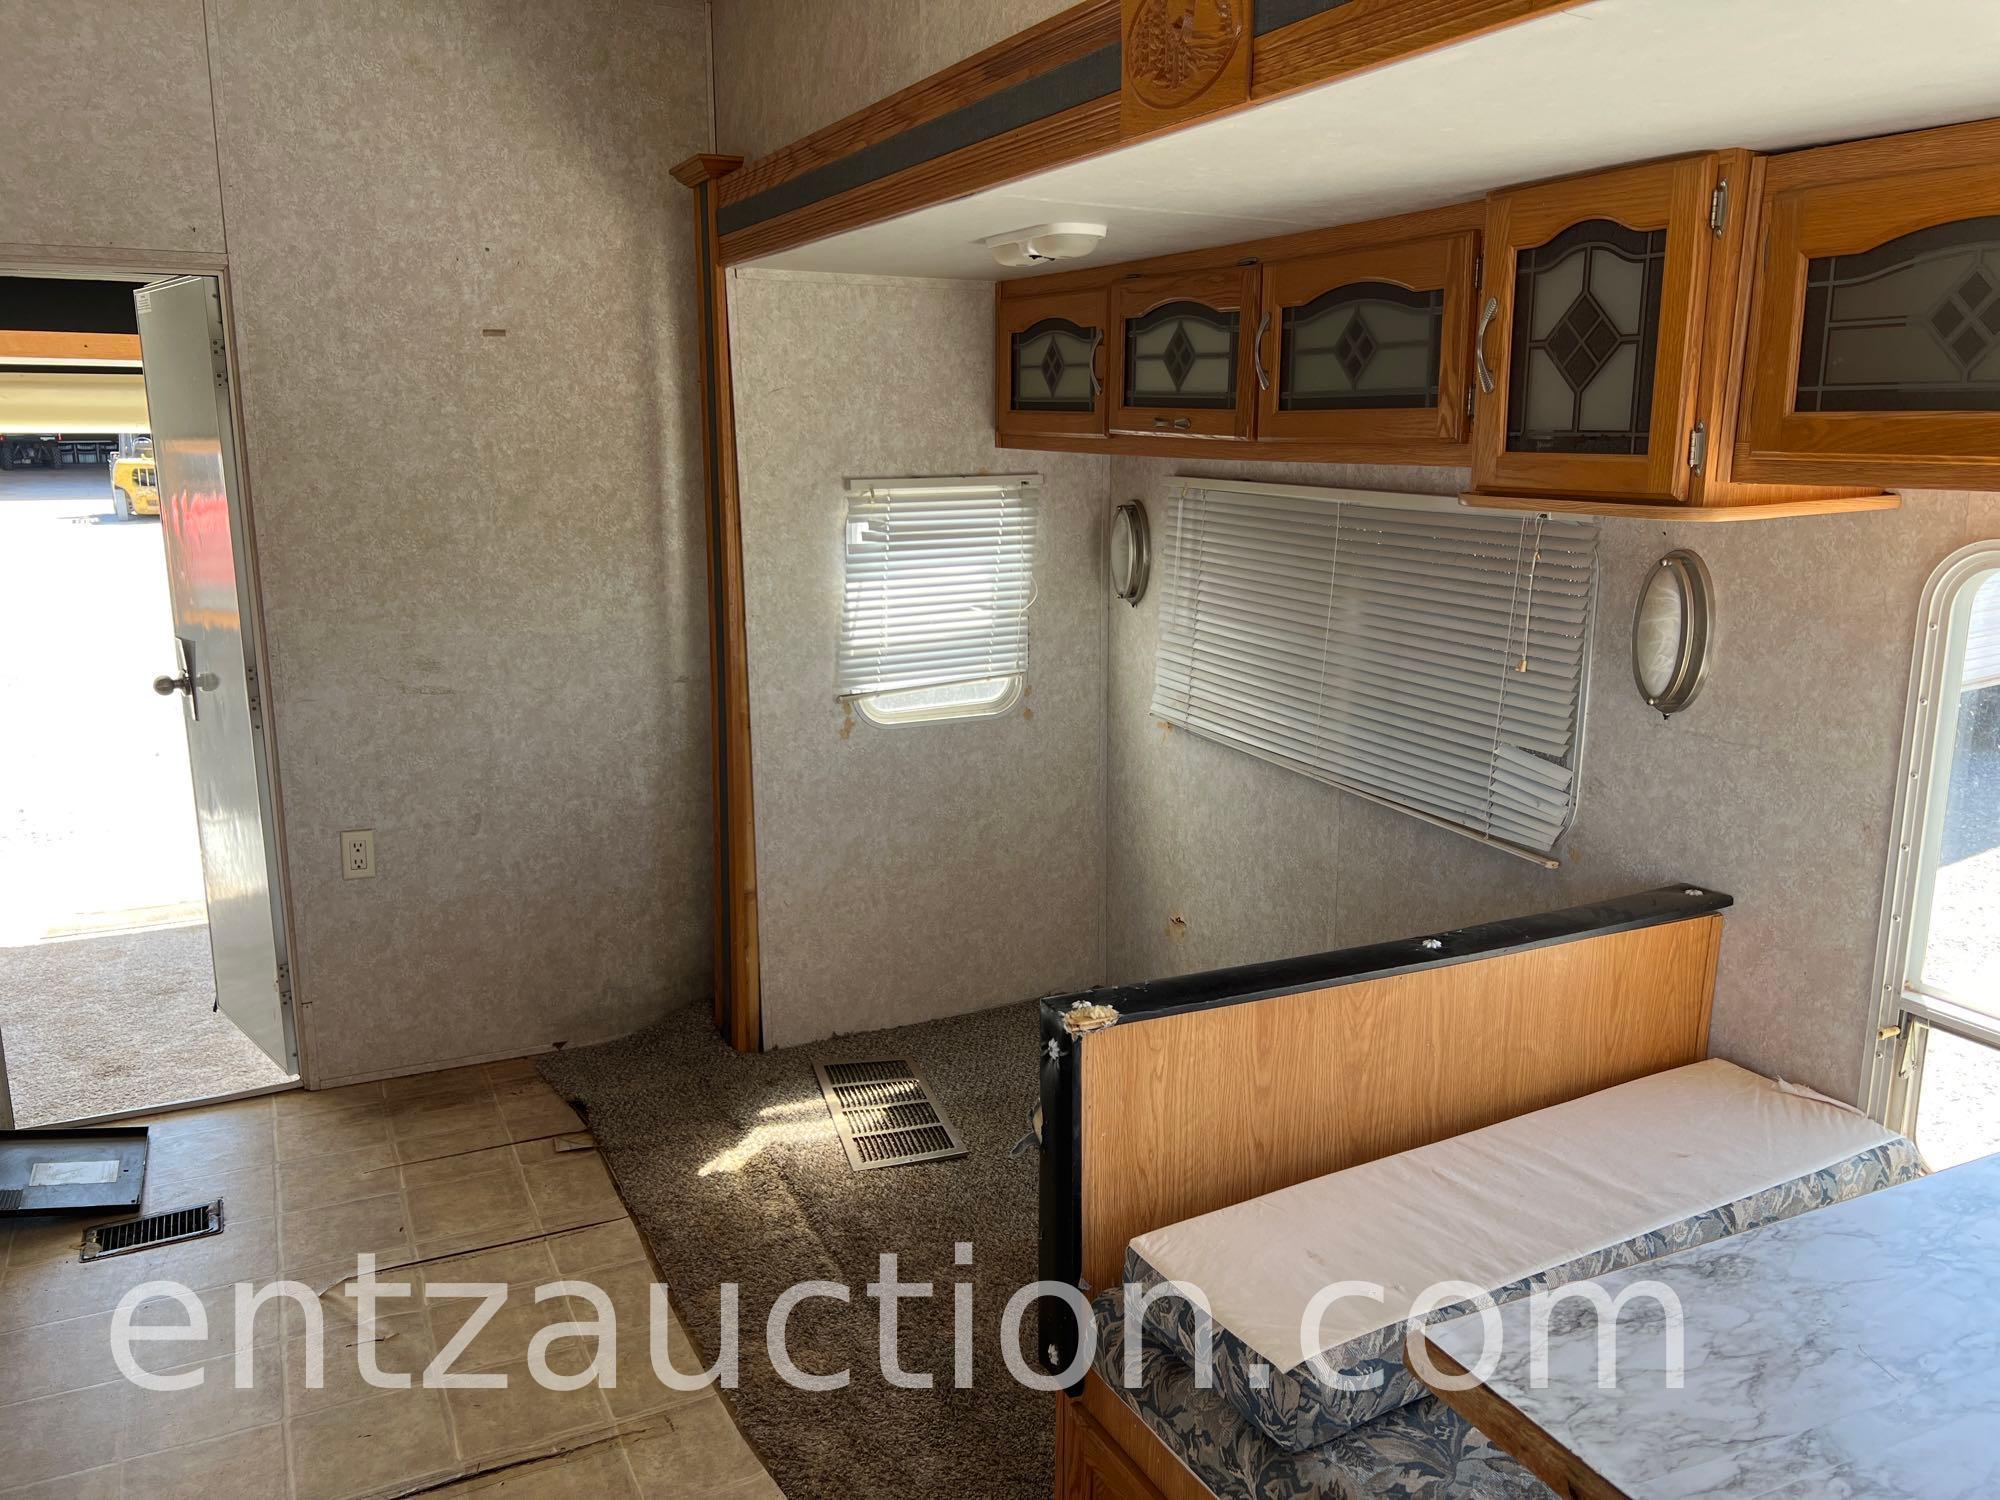 2004 FOREST RIVER 5TH WHEEL TRAVEL TRAILER, 35',